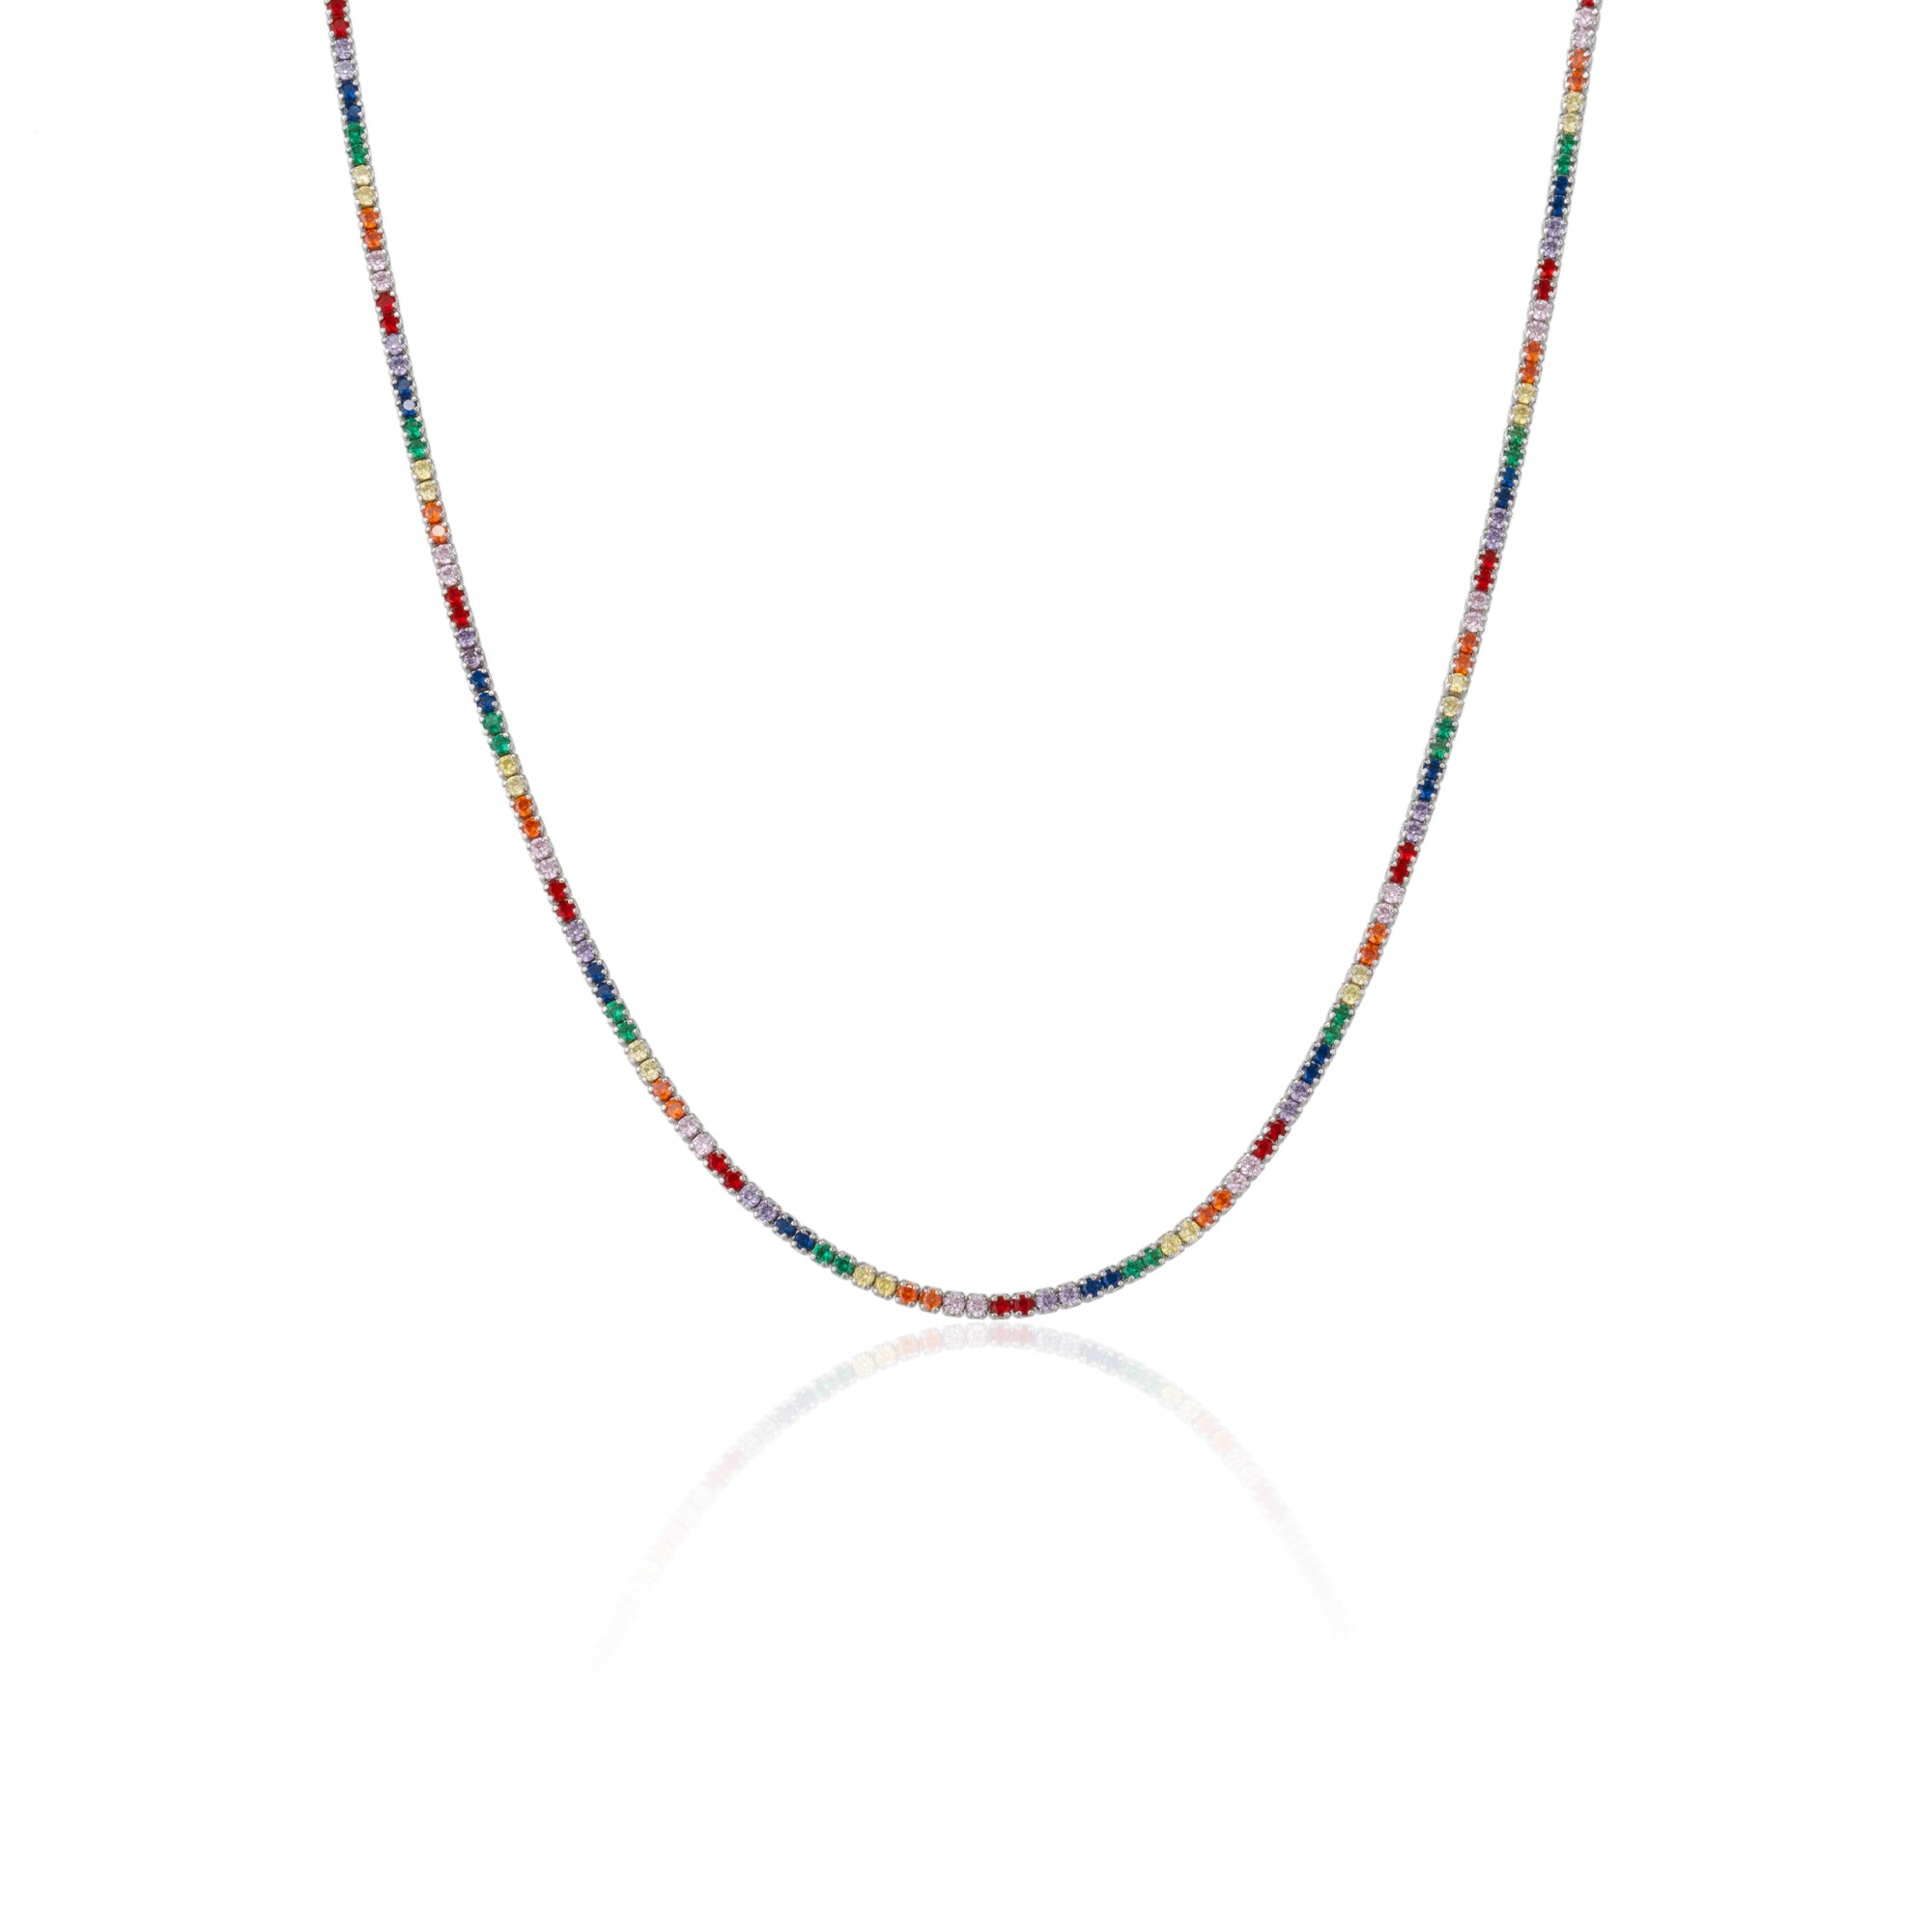 Rainbow Colourful Sterling Silver Tennis Necklace